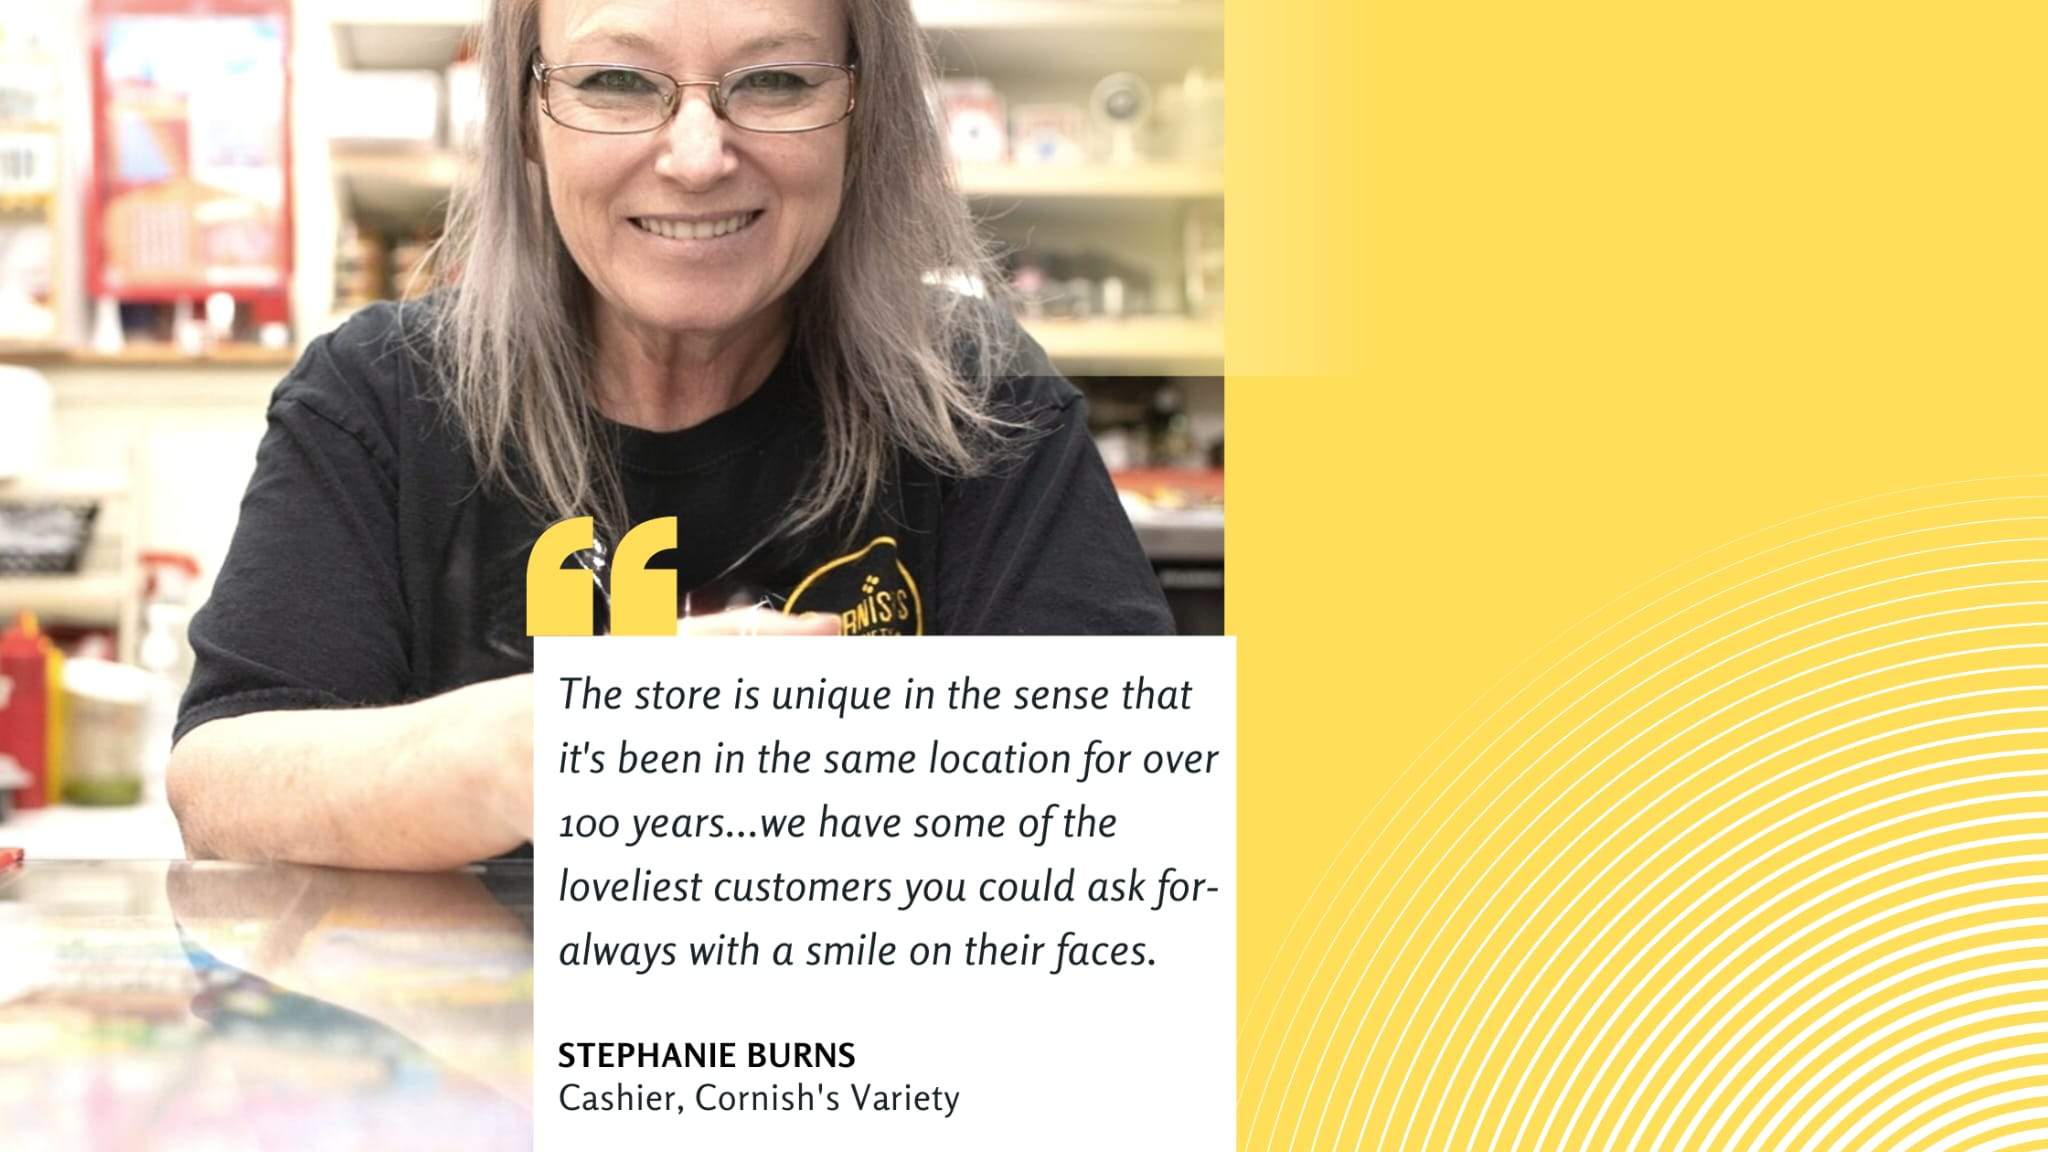 Testimonial Series – Unique Store and Smiling Customers